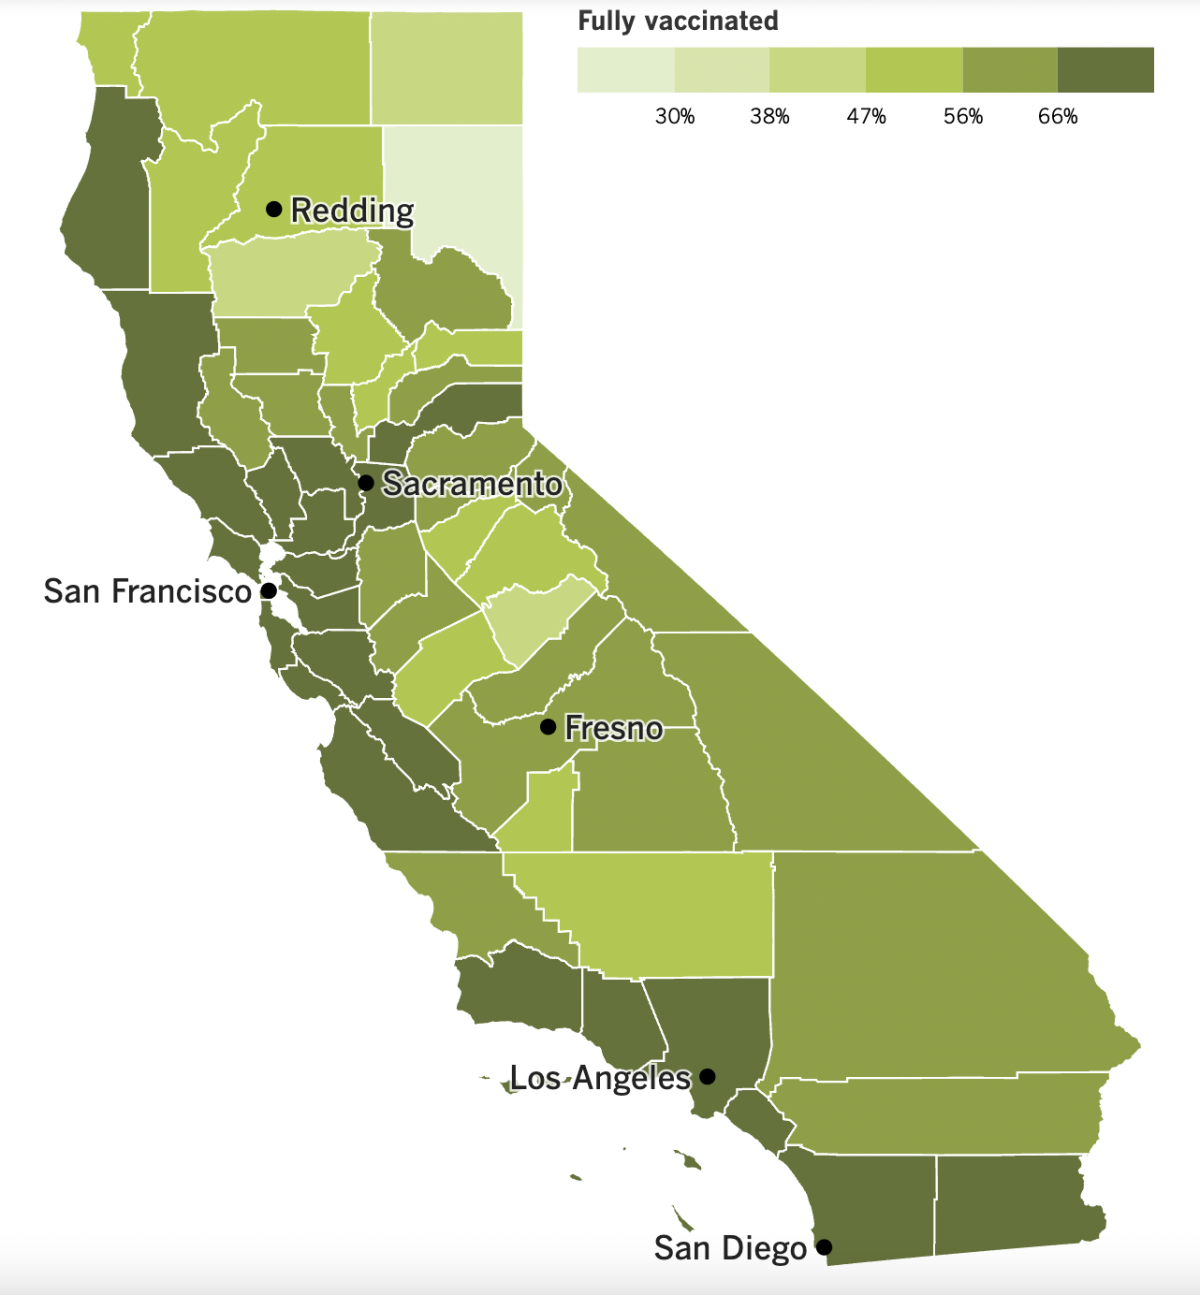 A map showing California's COVID-19 vaccination progress as of Sept. 13, 2022.